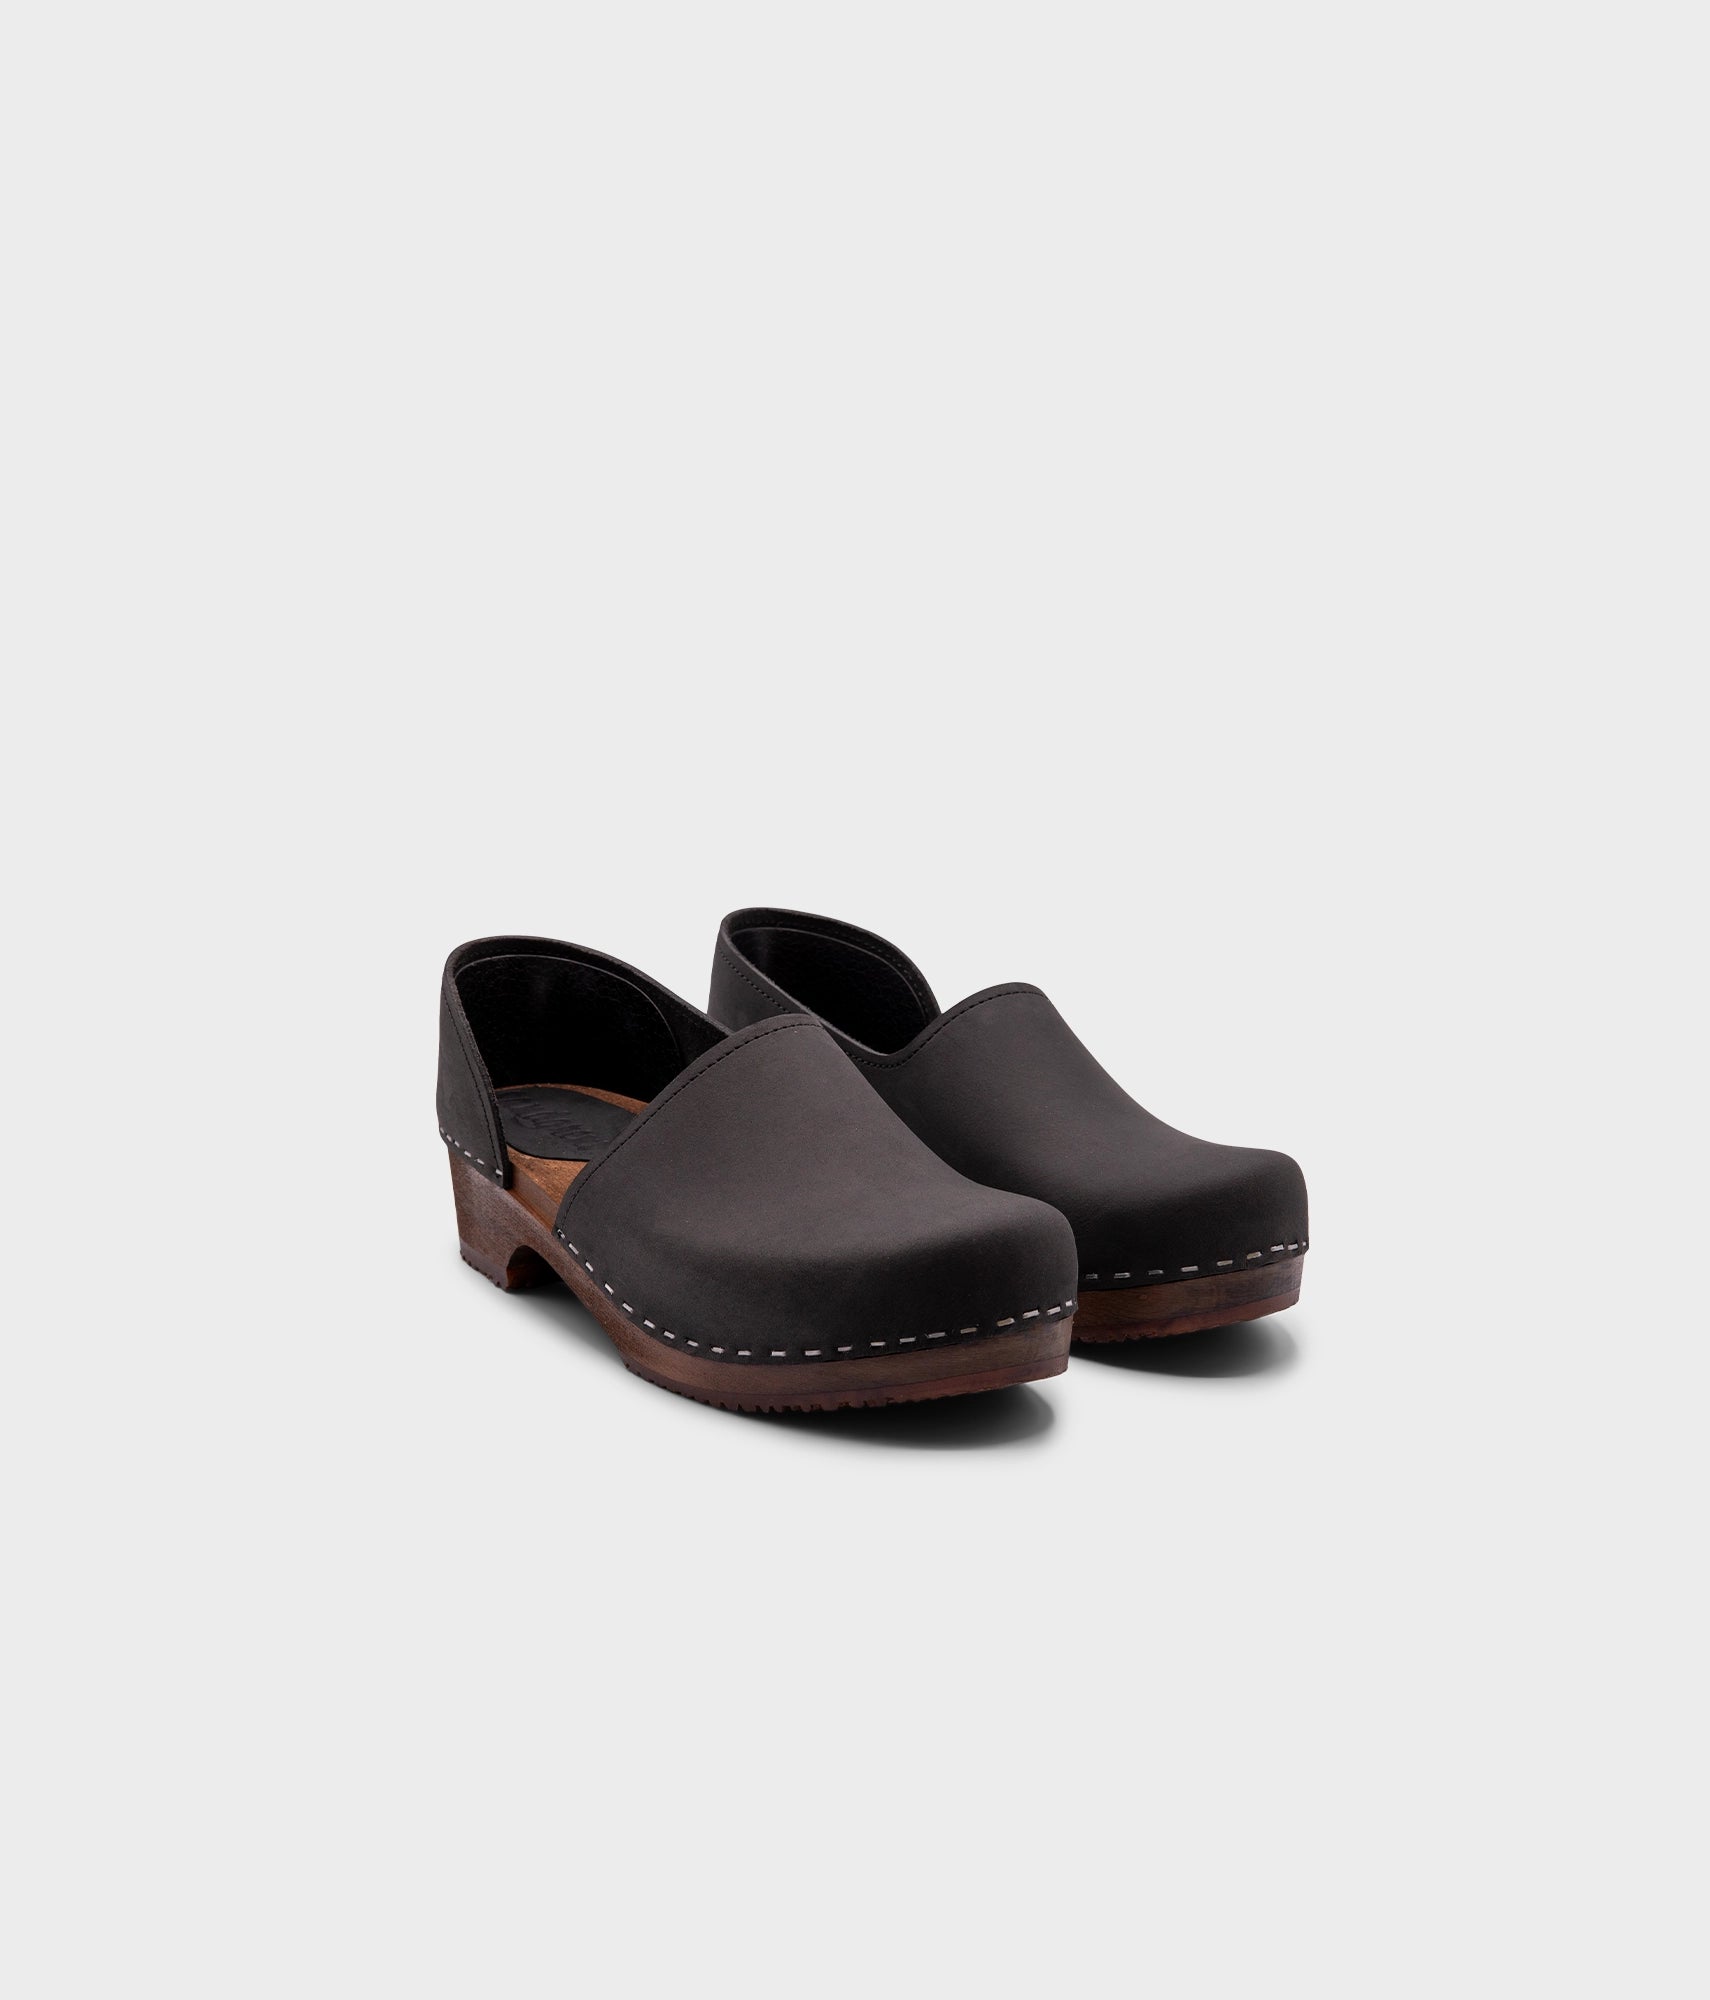 low heeled closed-back clogs in black nubuck leather stapled on a dark wooden base